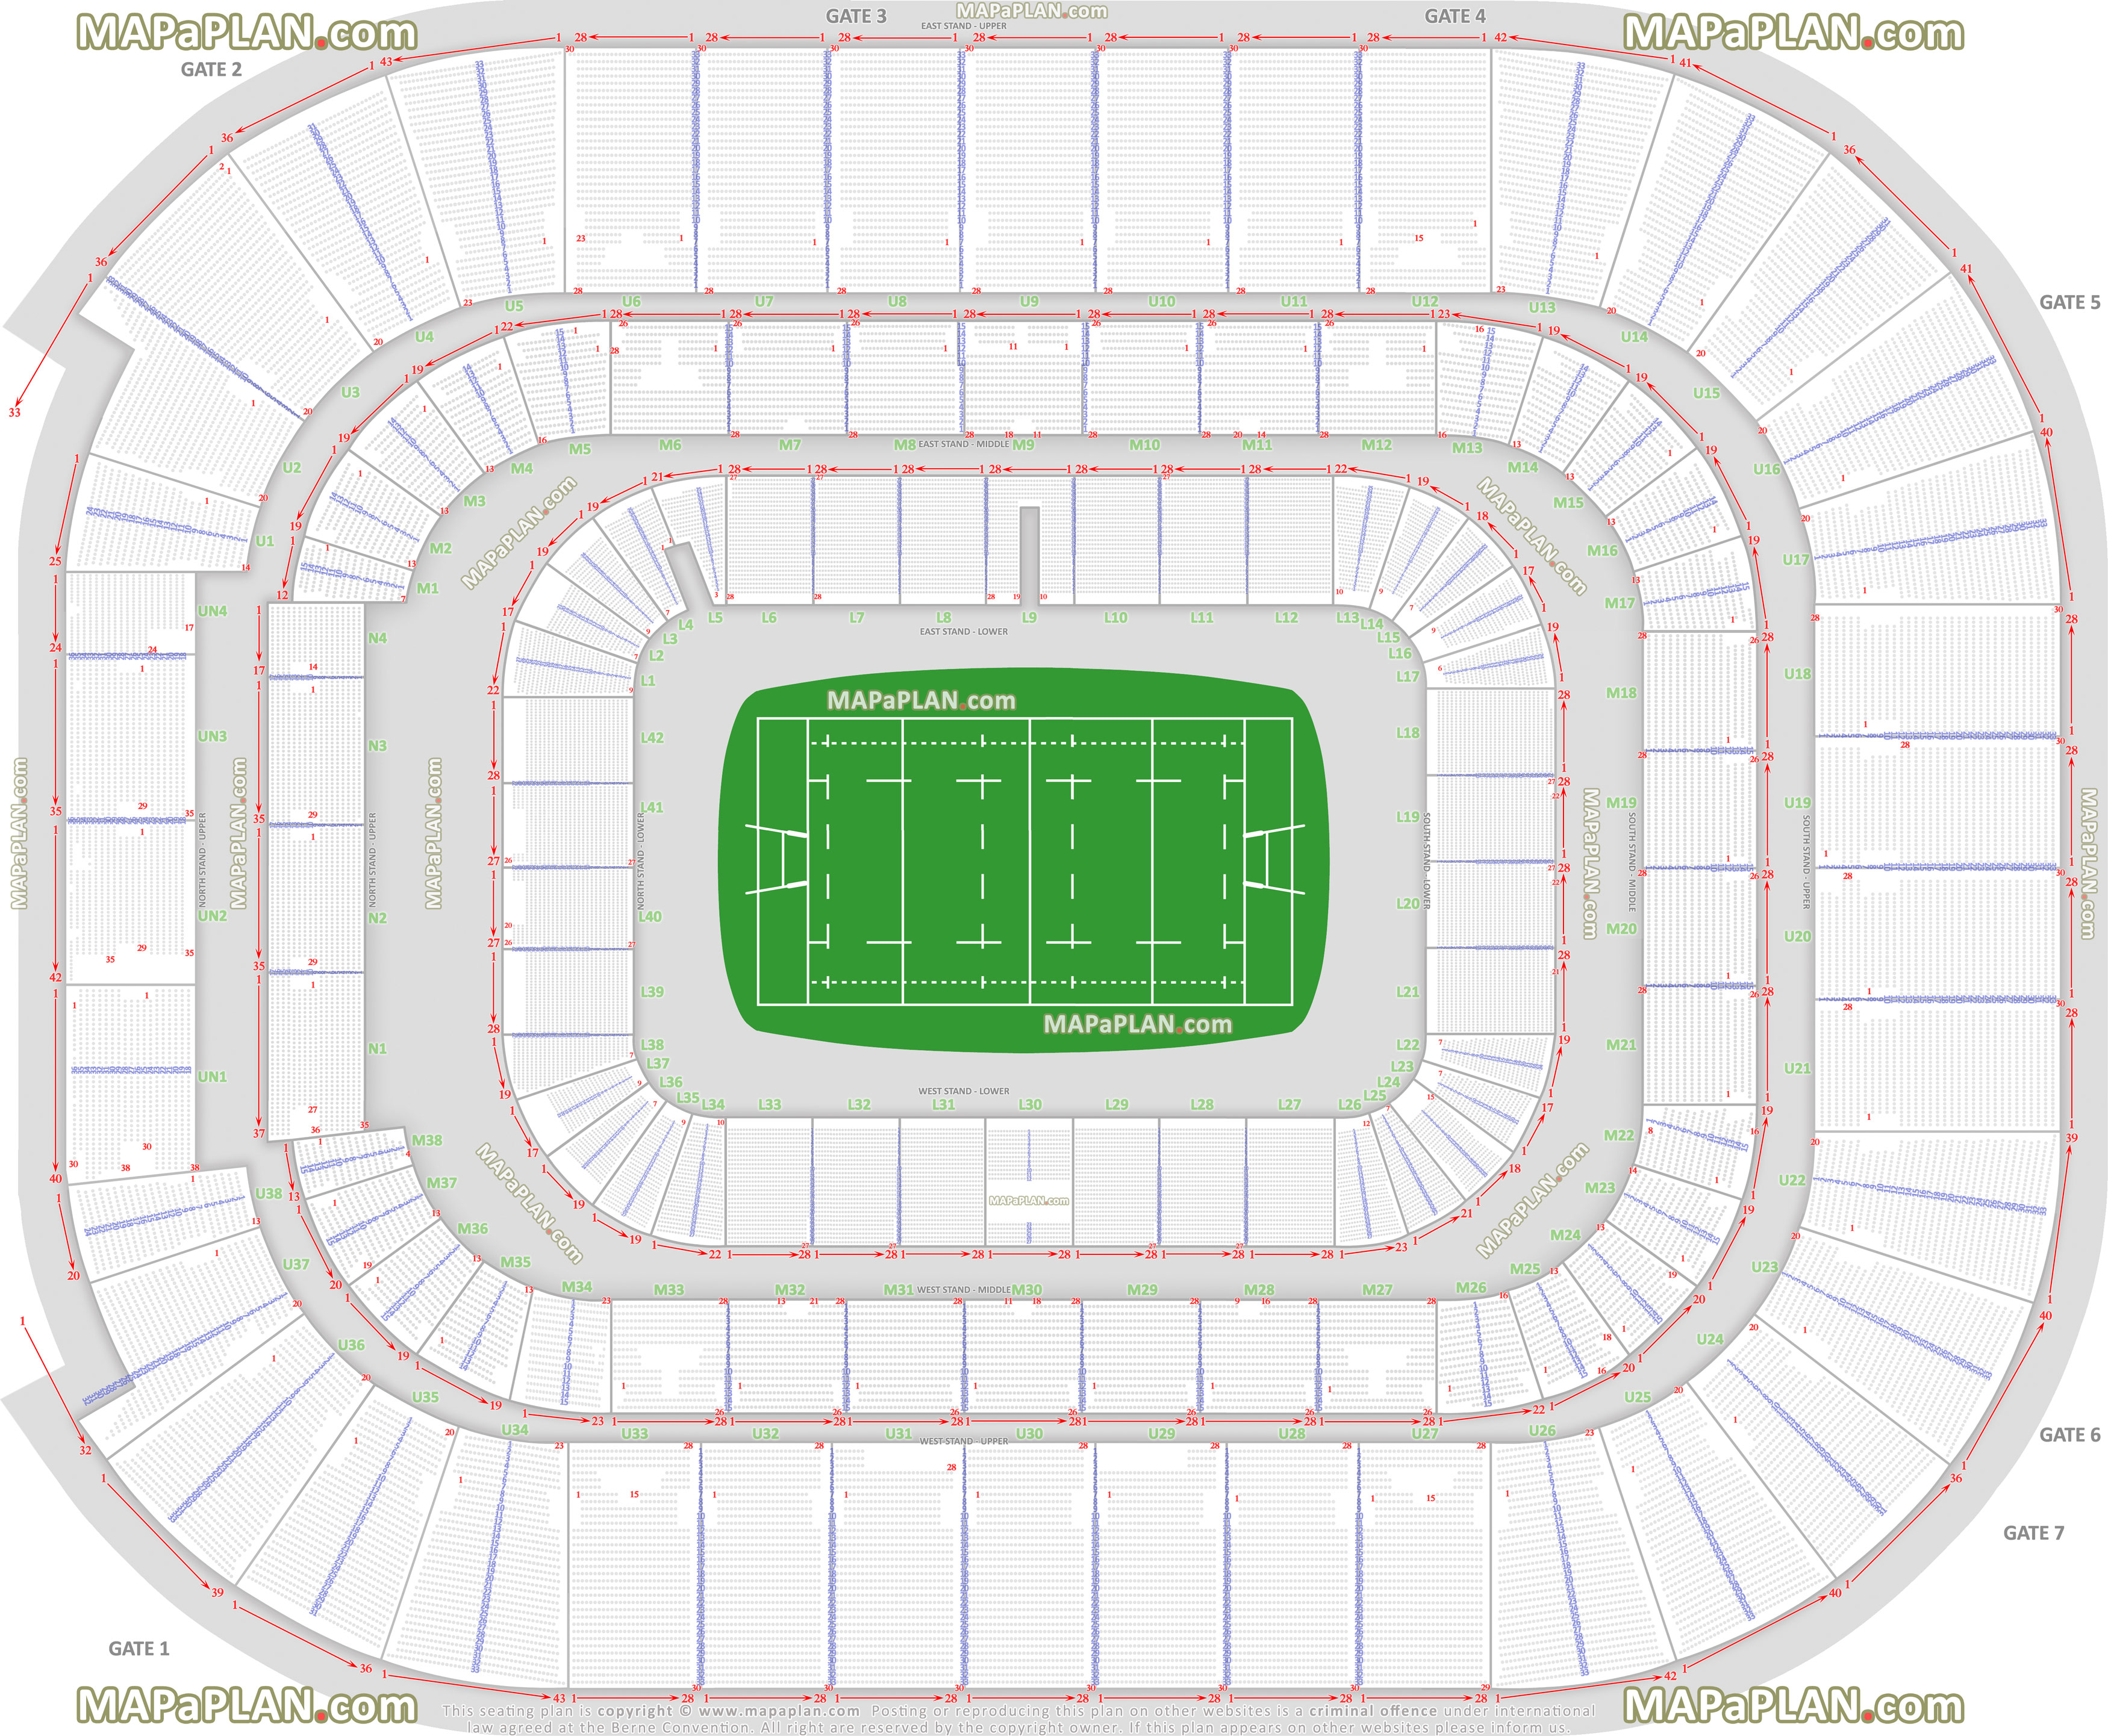 rugby world cup rwc seating map lower middle upper tier level generic layout map Cardiff Millennium Principality Stadium seating plan